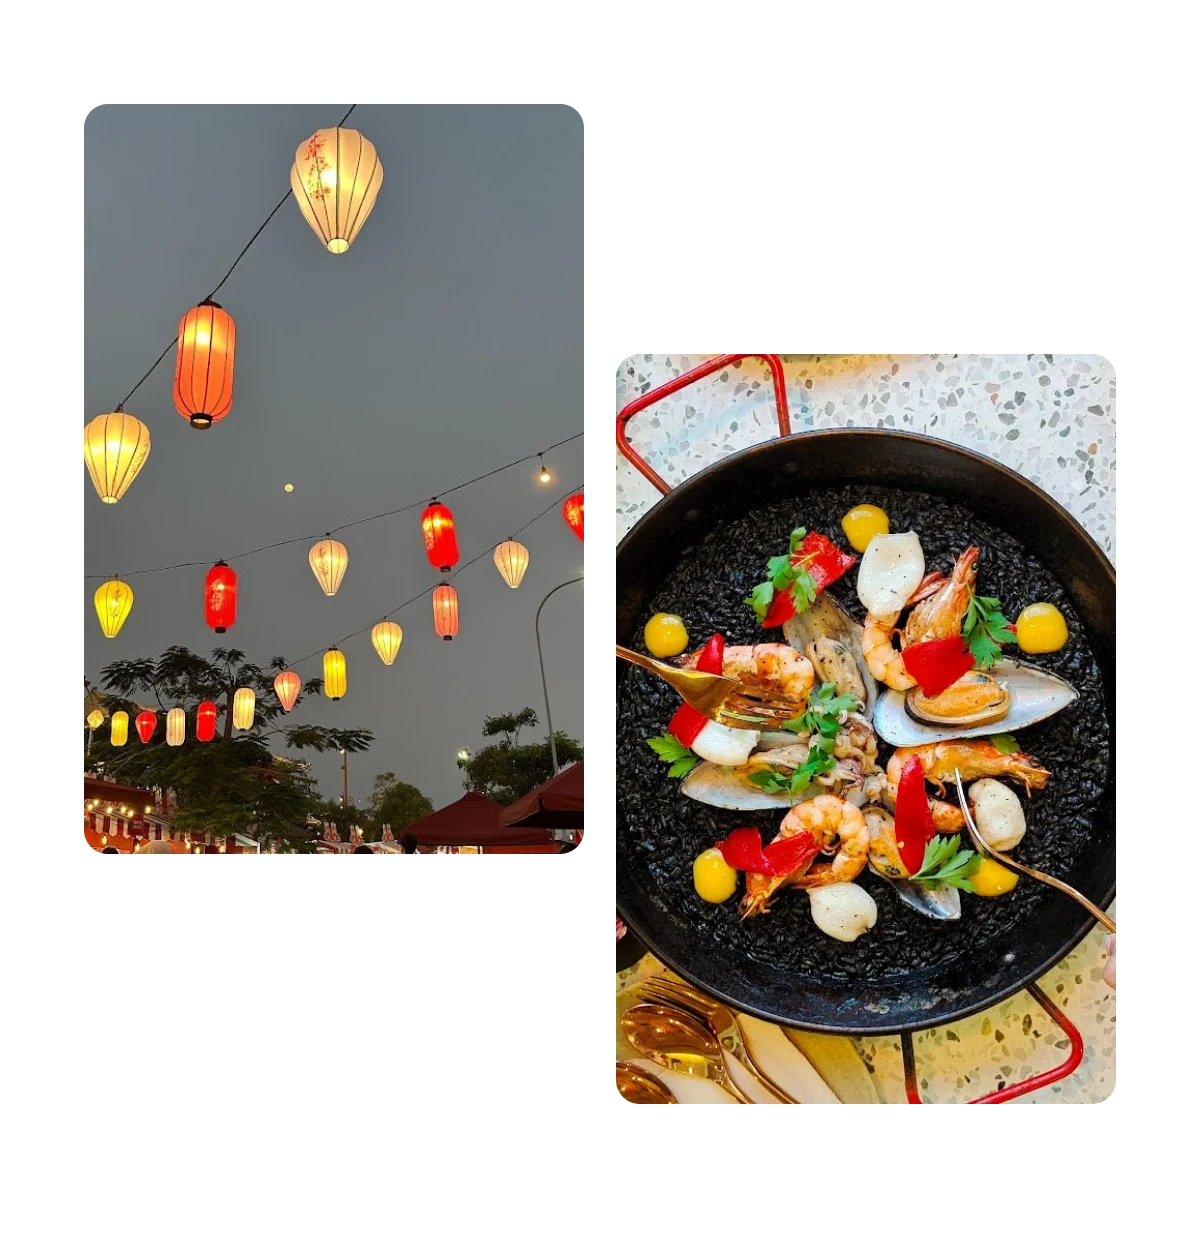 Two pins, decorative outdoor string of lanterns, wok filled with food